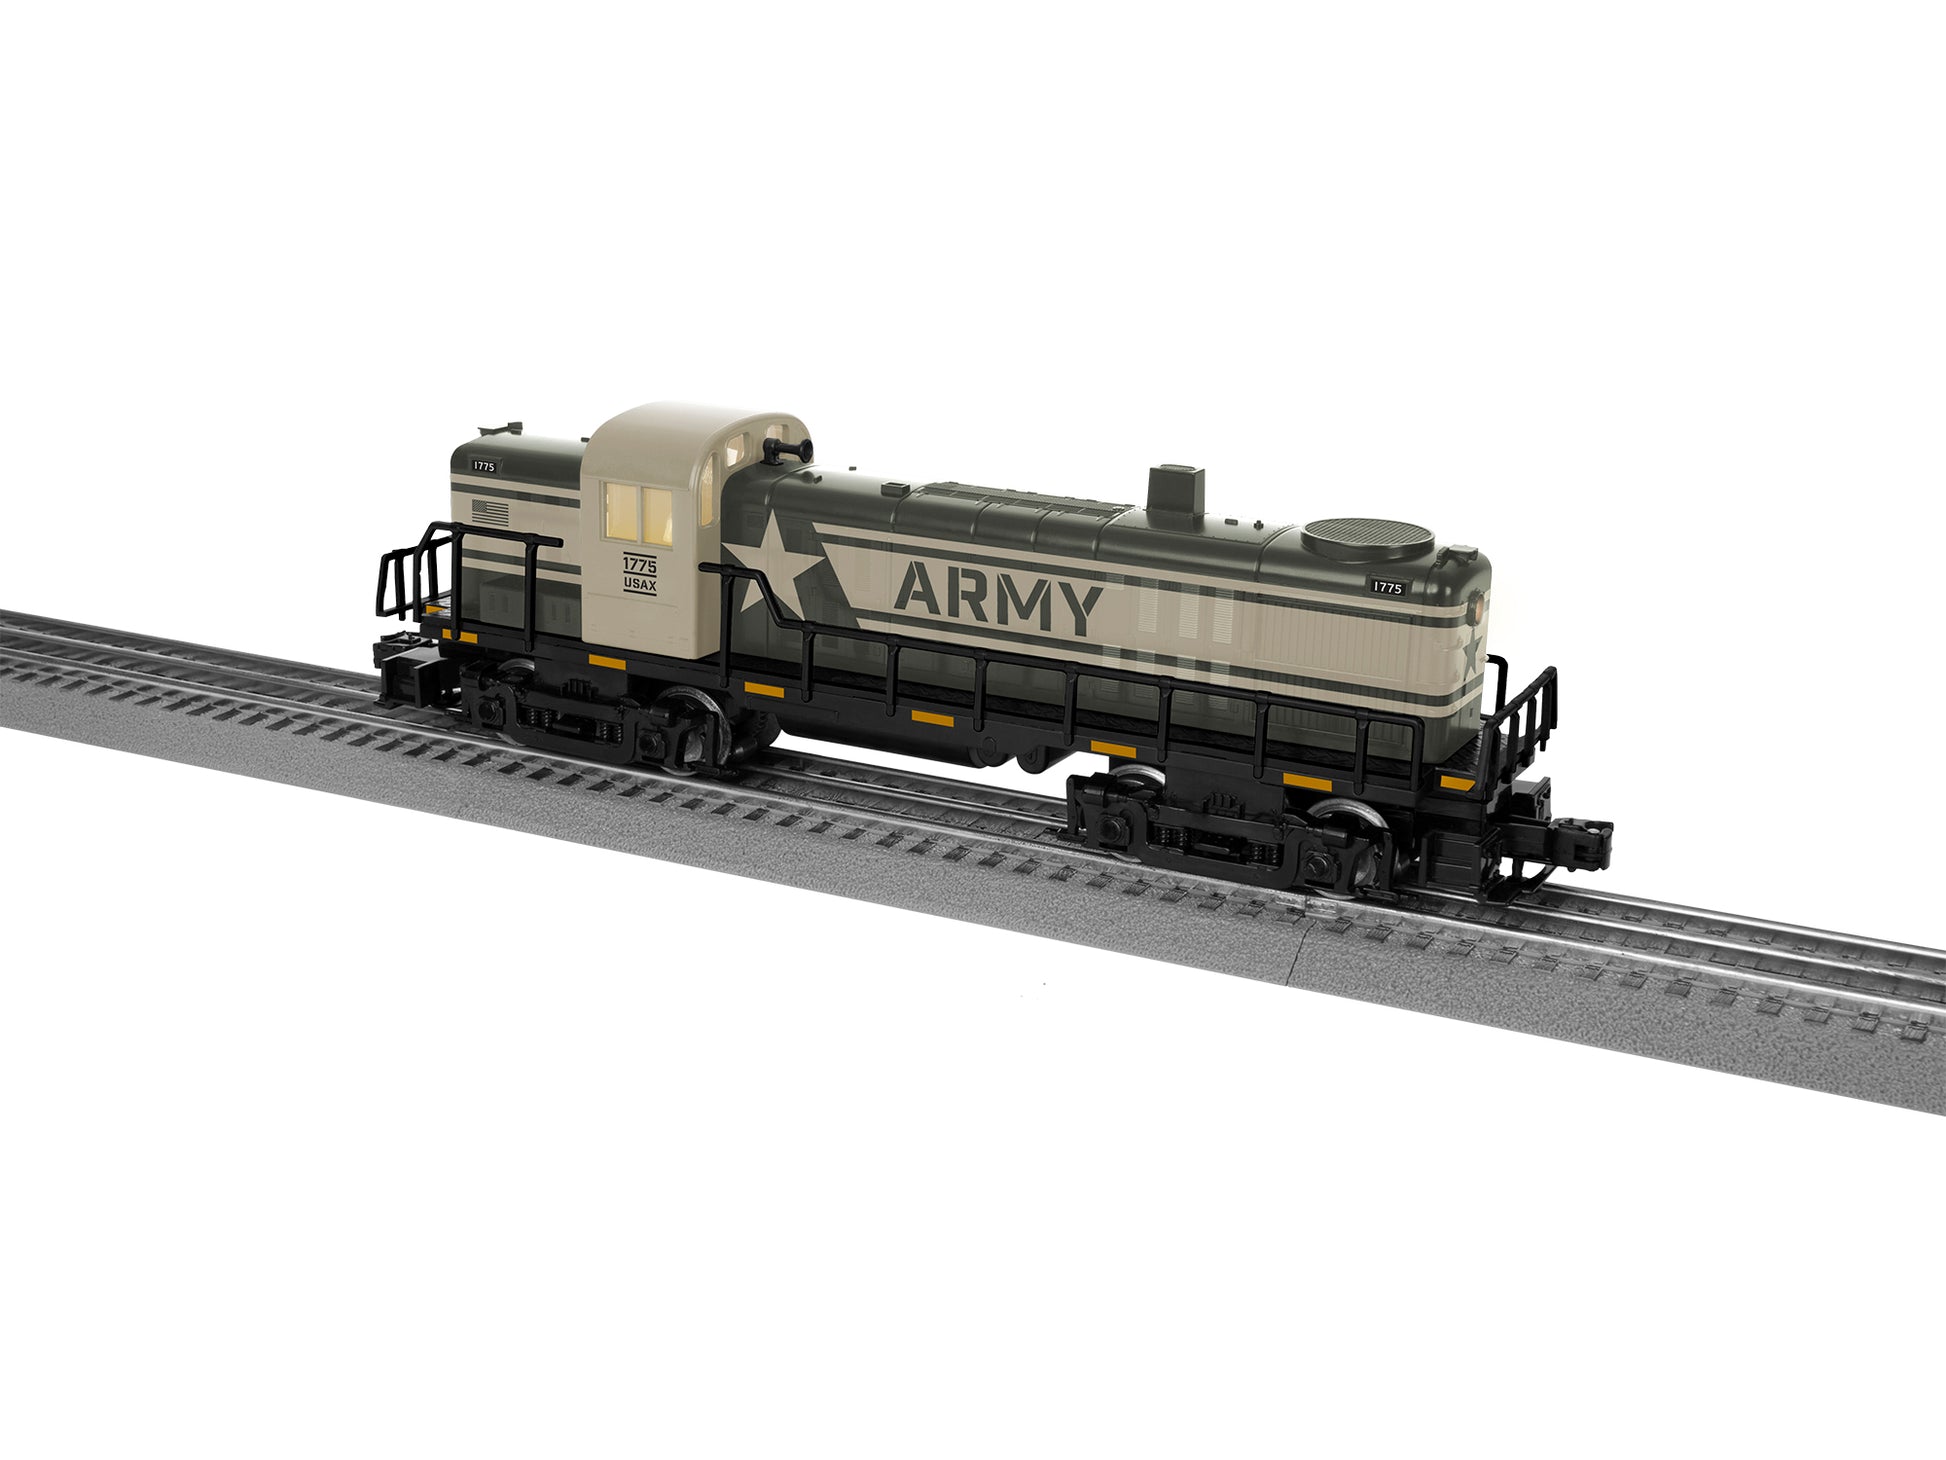 The engine for Model Train set O scale Lionel Army Freight LionChief.